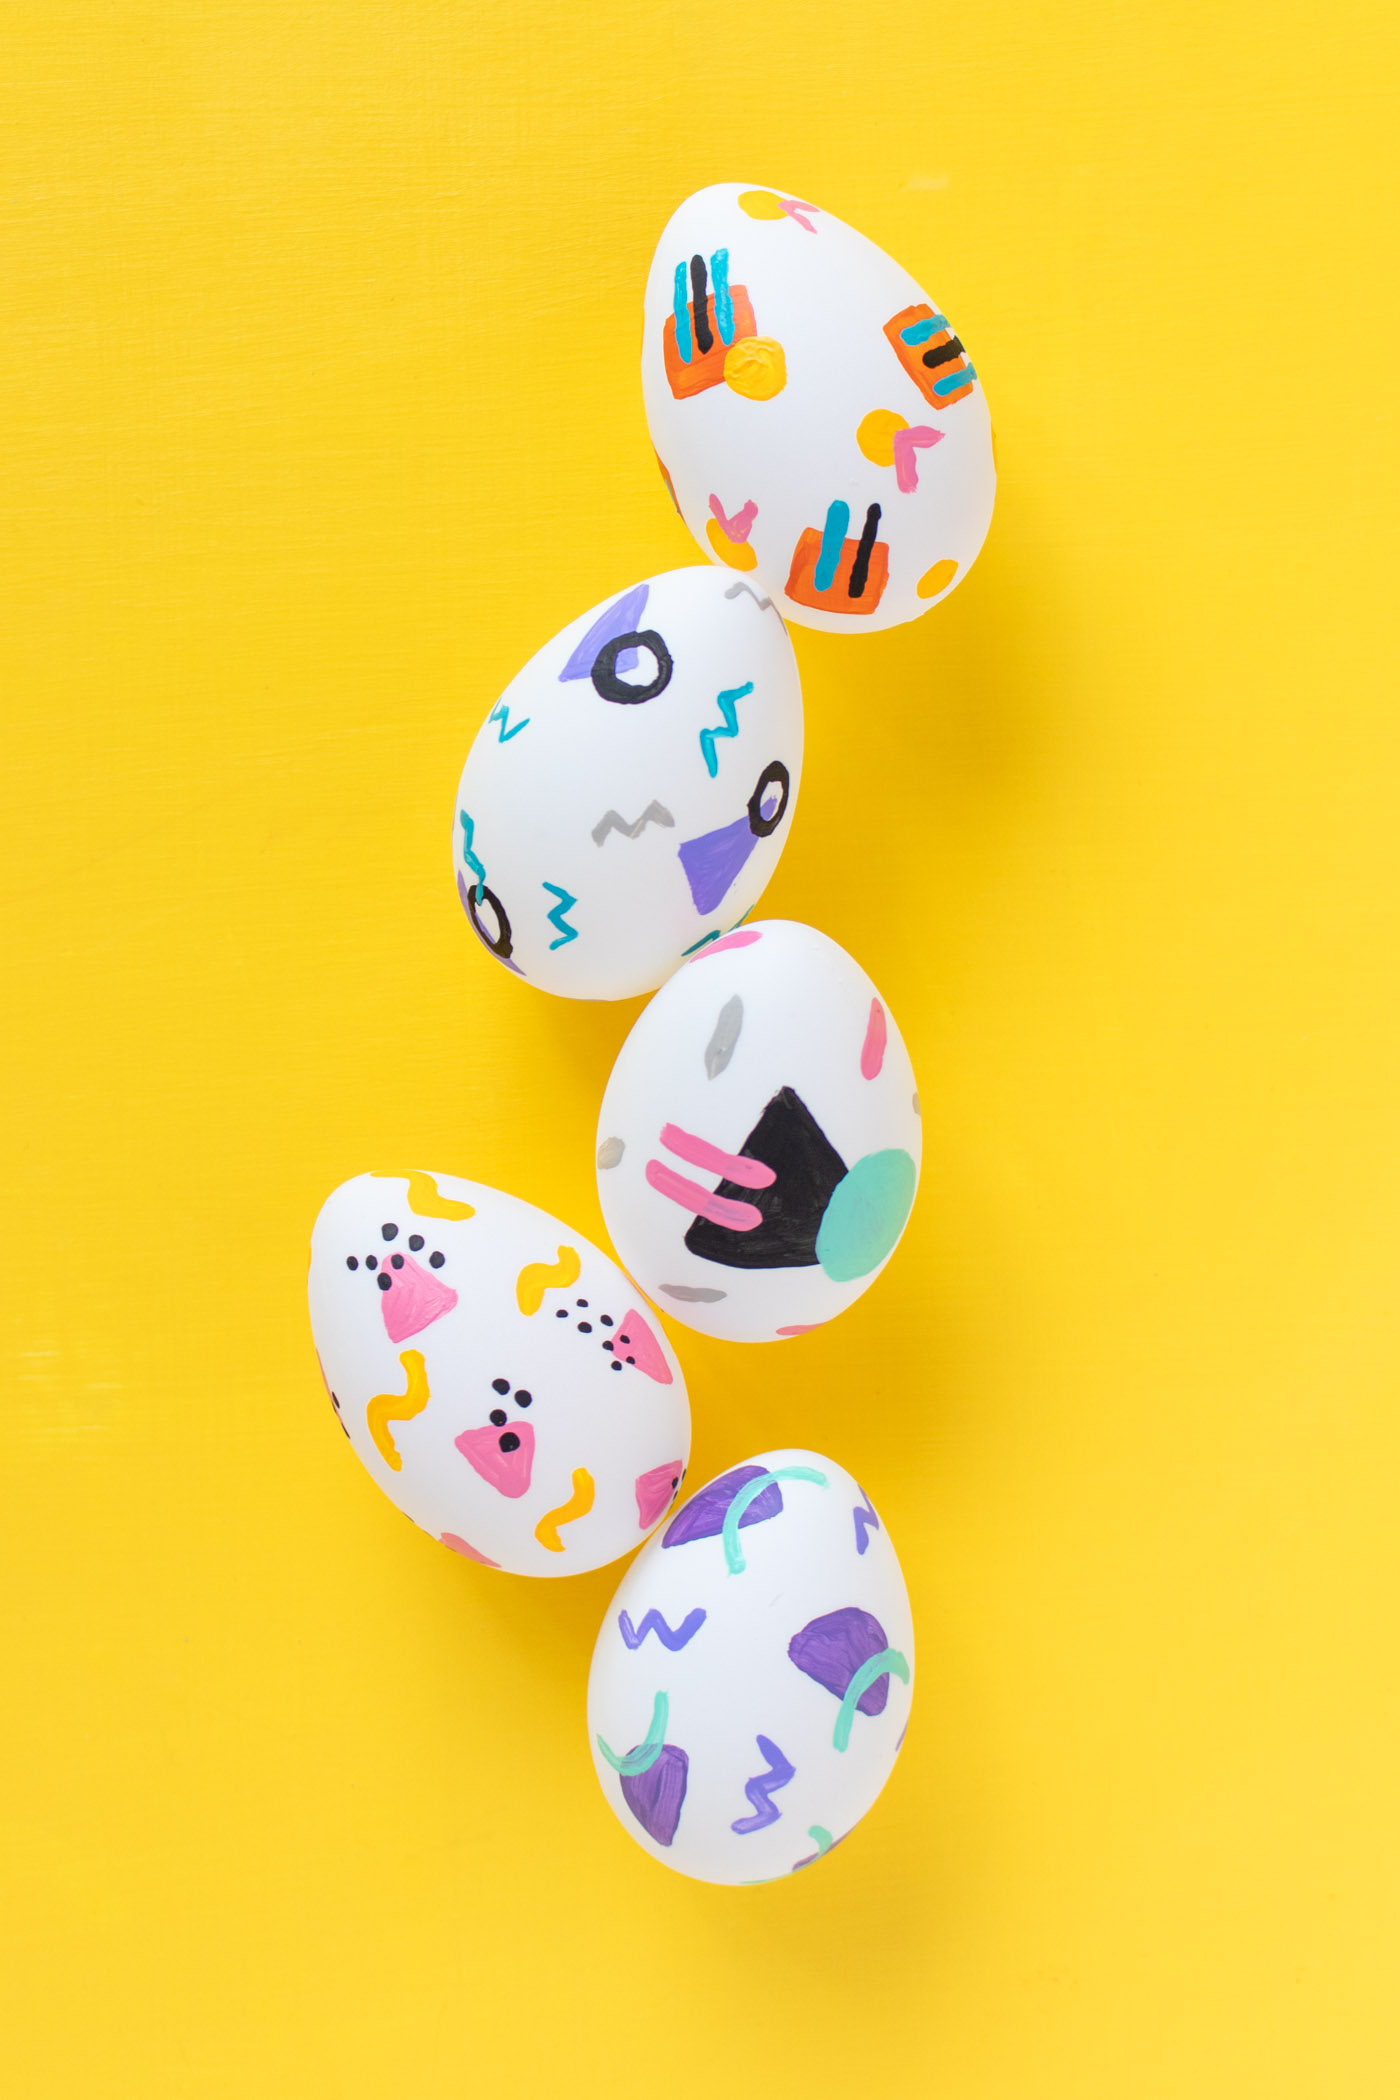 DIY 90s Patterned Easter Eggs | Club Crafted